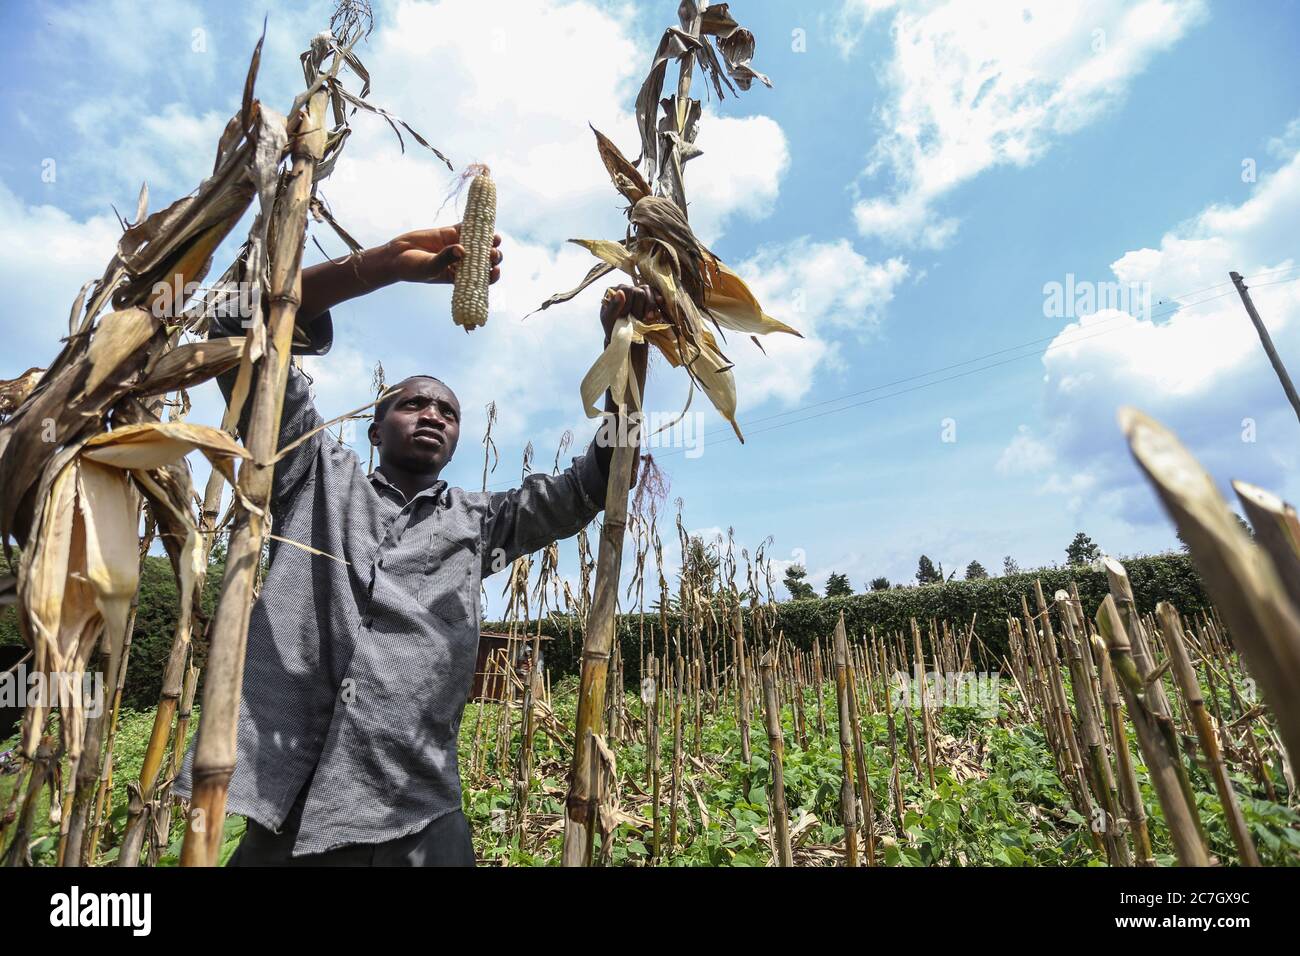 Kericho, Kenya. 17th July, 2020. Mr. Brian Kiplangat harvesting maize (corn) in their family farm in Kericho County amid Coronavirus (COVID-19) crisis.Maize is a staple food in majority of Kenyan families. Some Kenyans living in cities have left for rural areas due to tough economic challenges resulting from the Covid-19 pandemic and opting to practice small-scale farming as some lost jobs. Credit: SOPA Images Limited/Alamy Live News Stock Photo